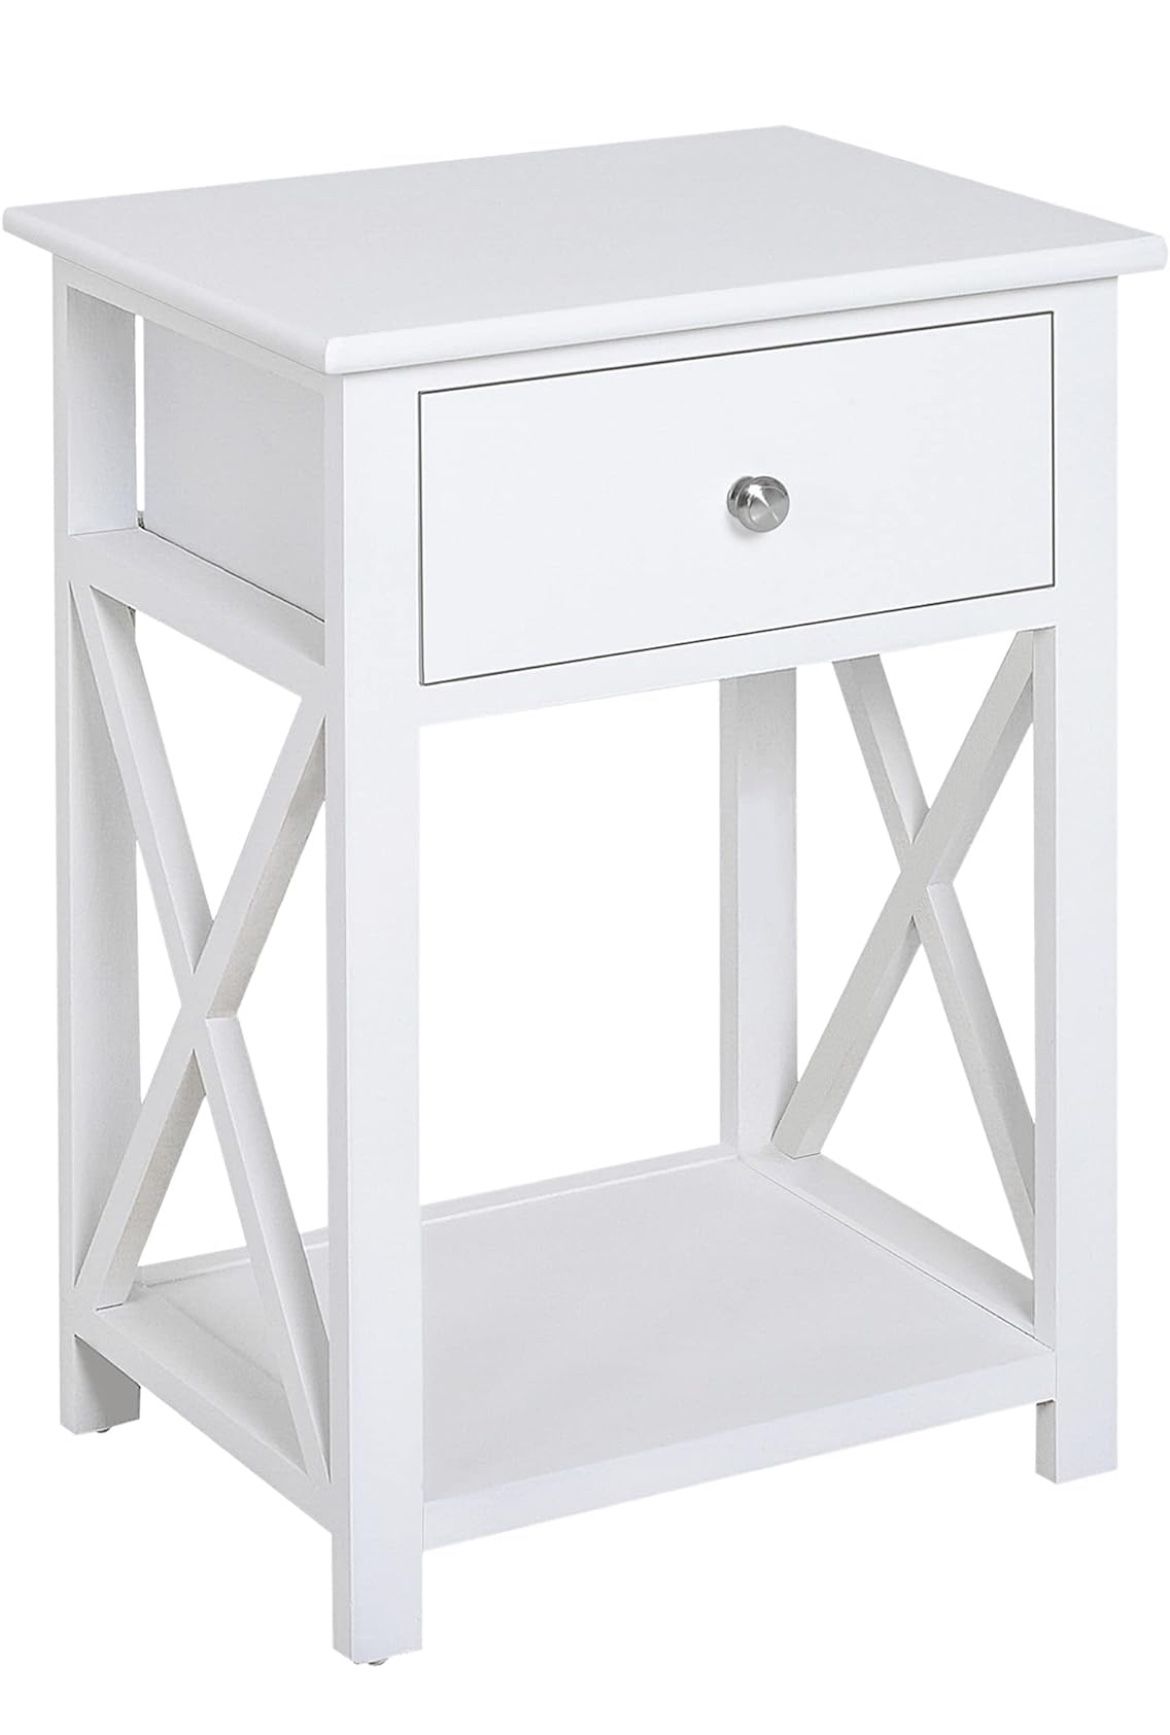 HOMCOM Side Table, Farmhouse End Table with Storage Drawer, Open Shelf and X-Frame, 